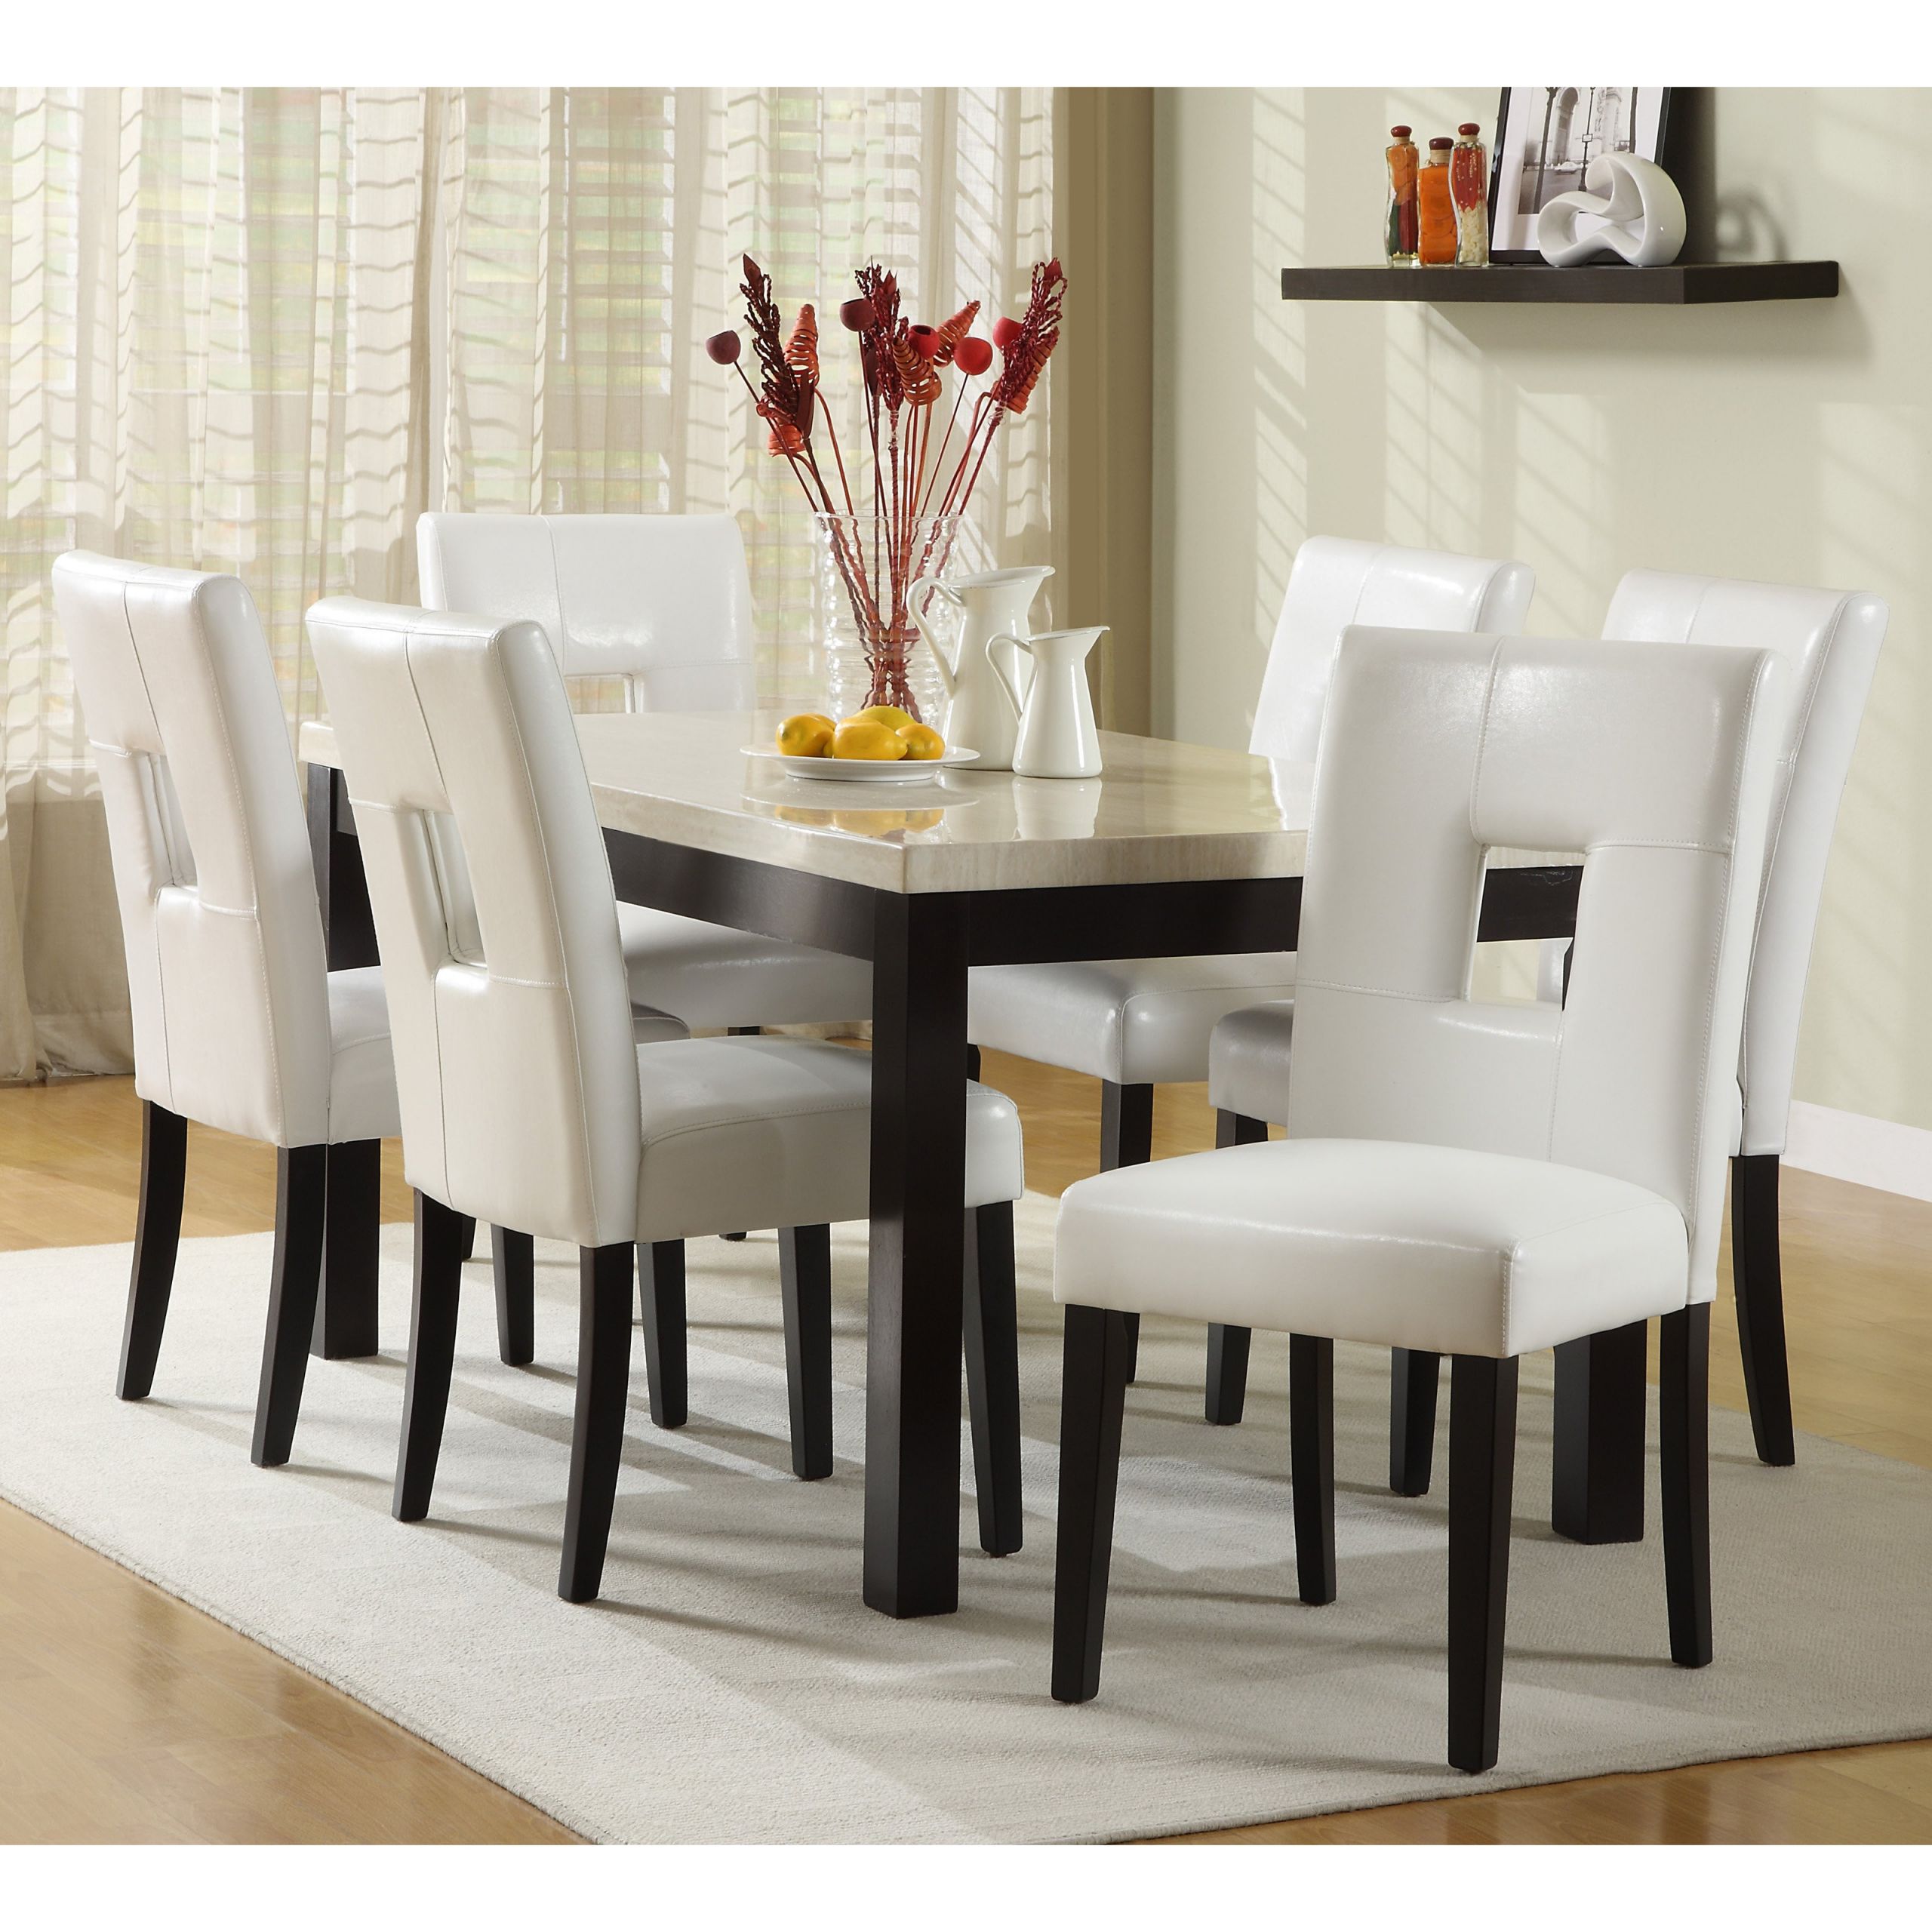 White Kitchen Table And Chairs
 White Round Kitchen Table and Chairs Design